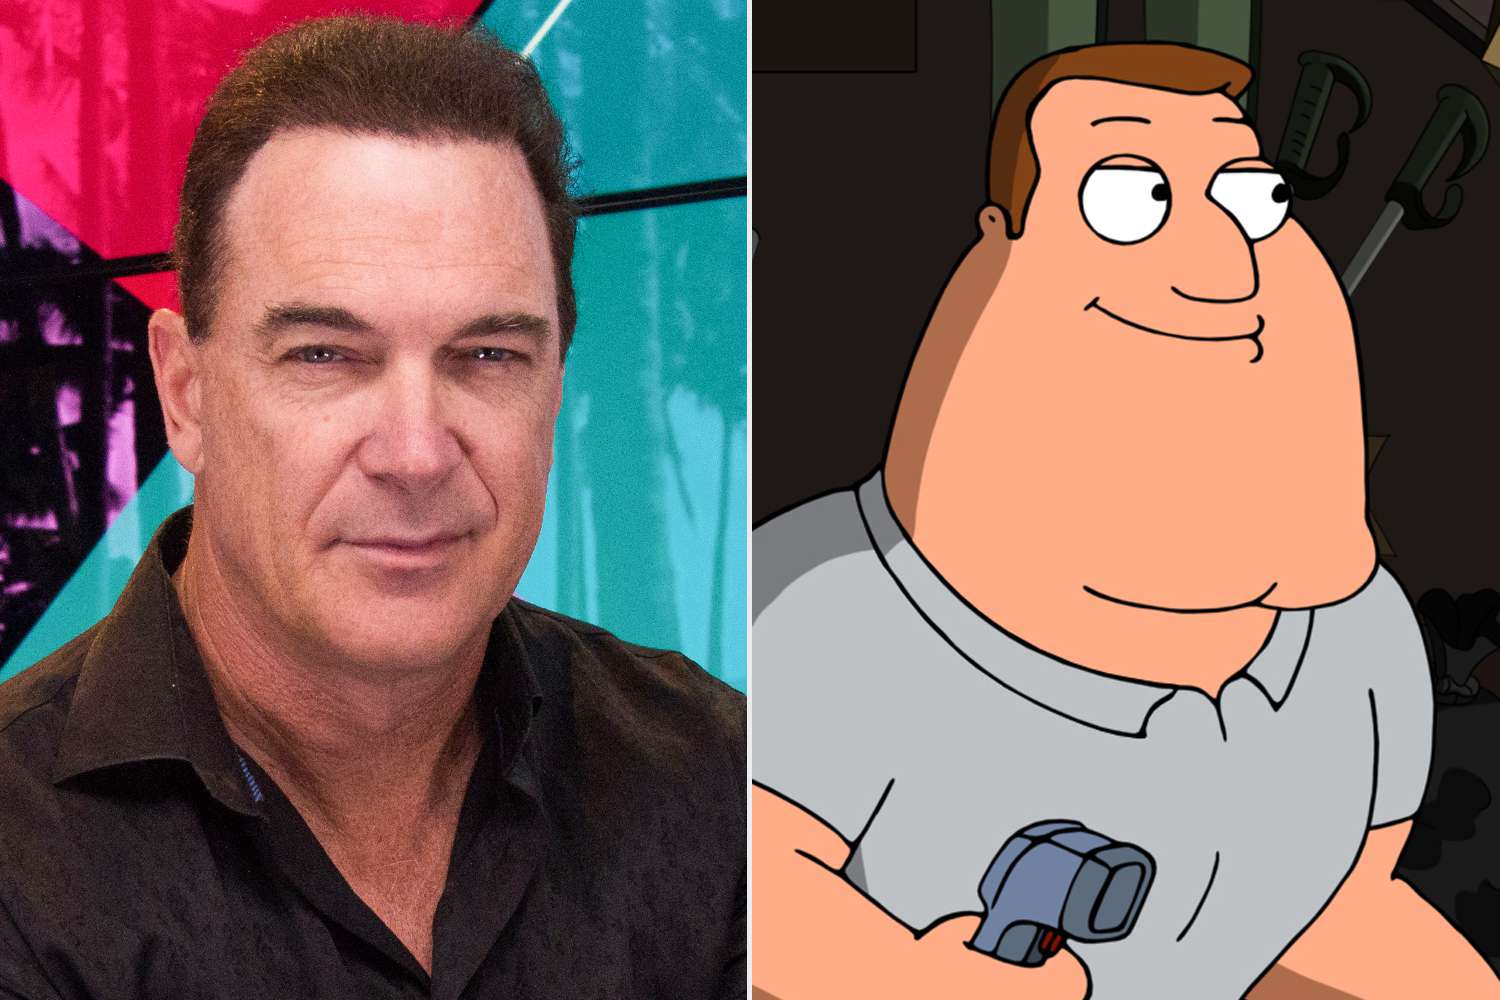 'Family Guy' star Patrick Warburton's mom tried to get the show canceled